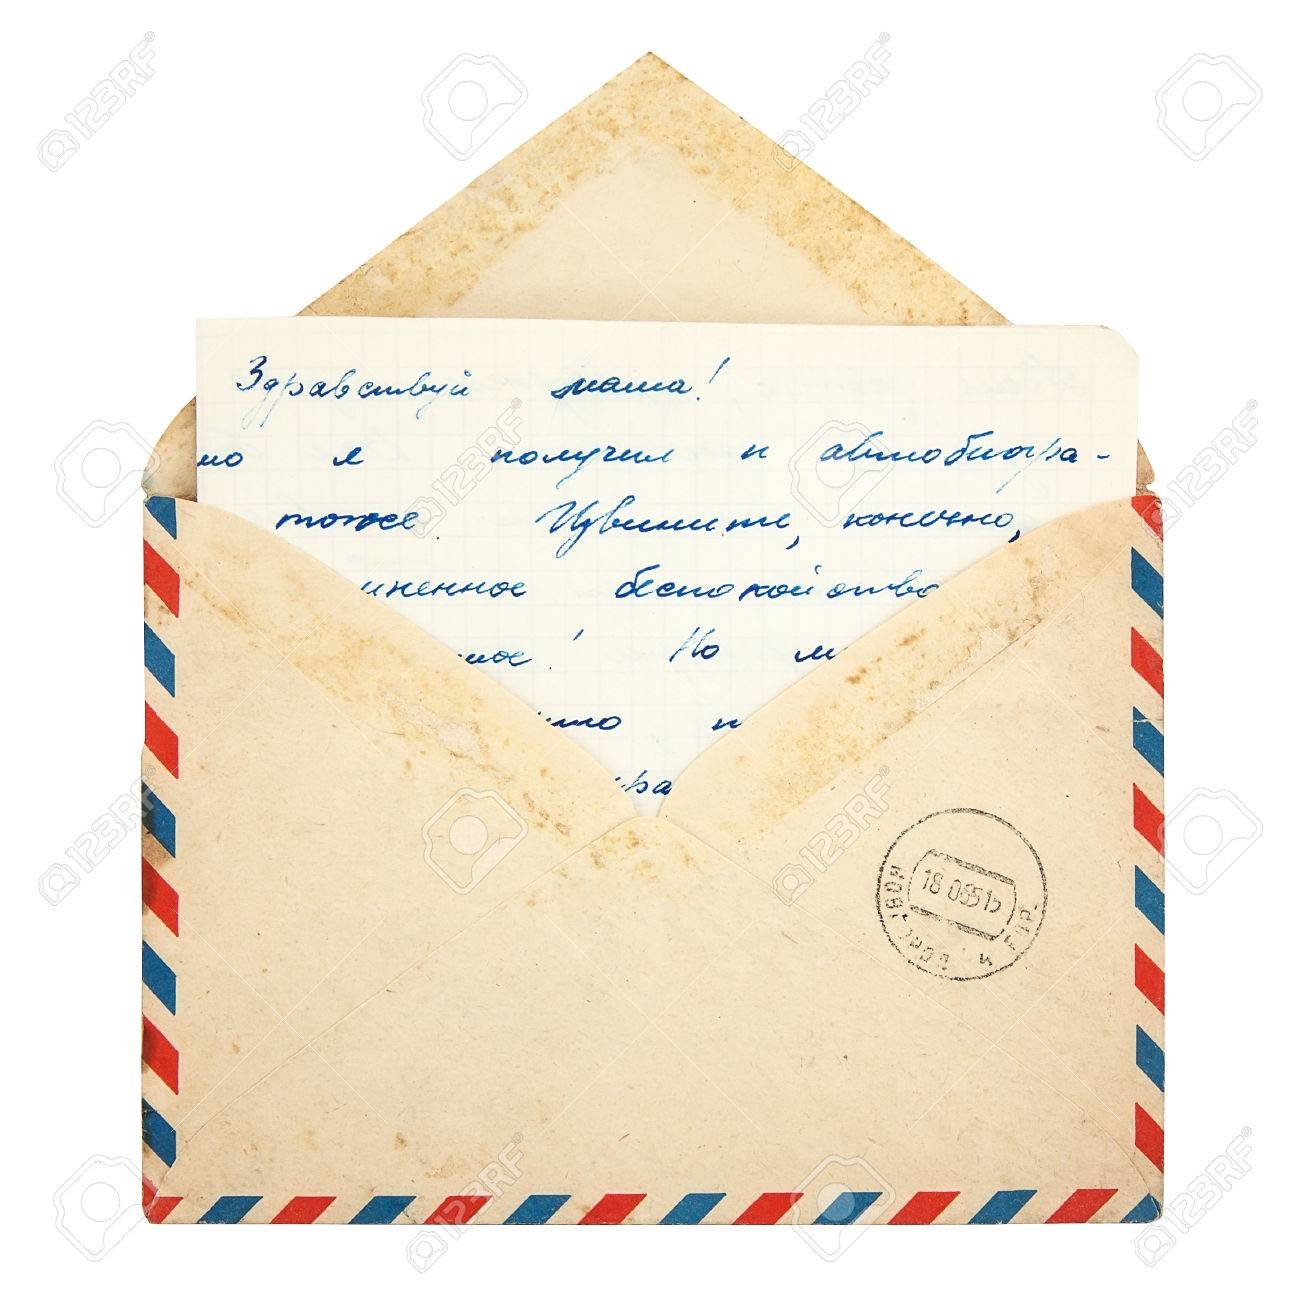 Old envelope and letter on a white background